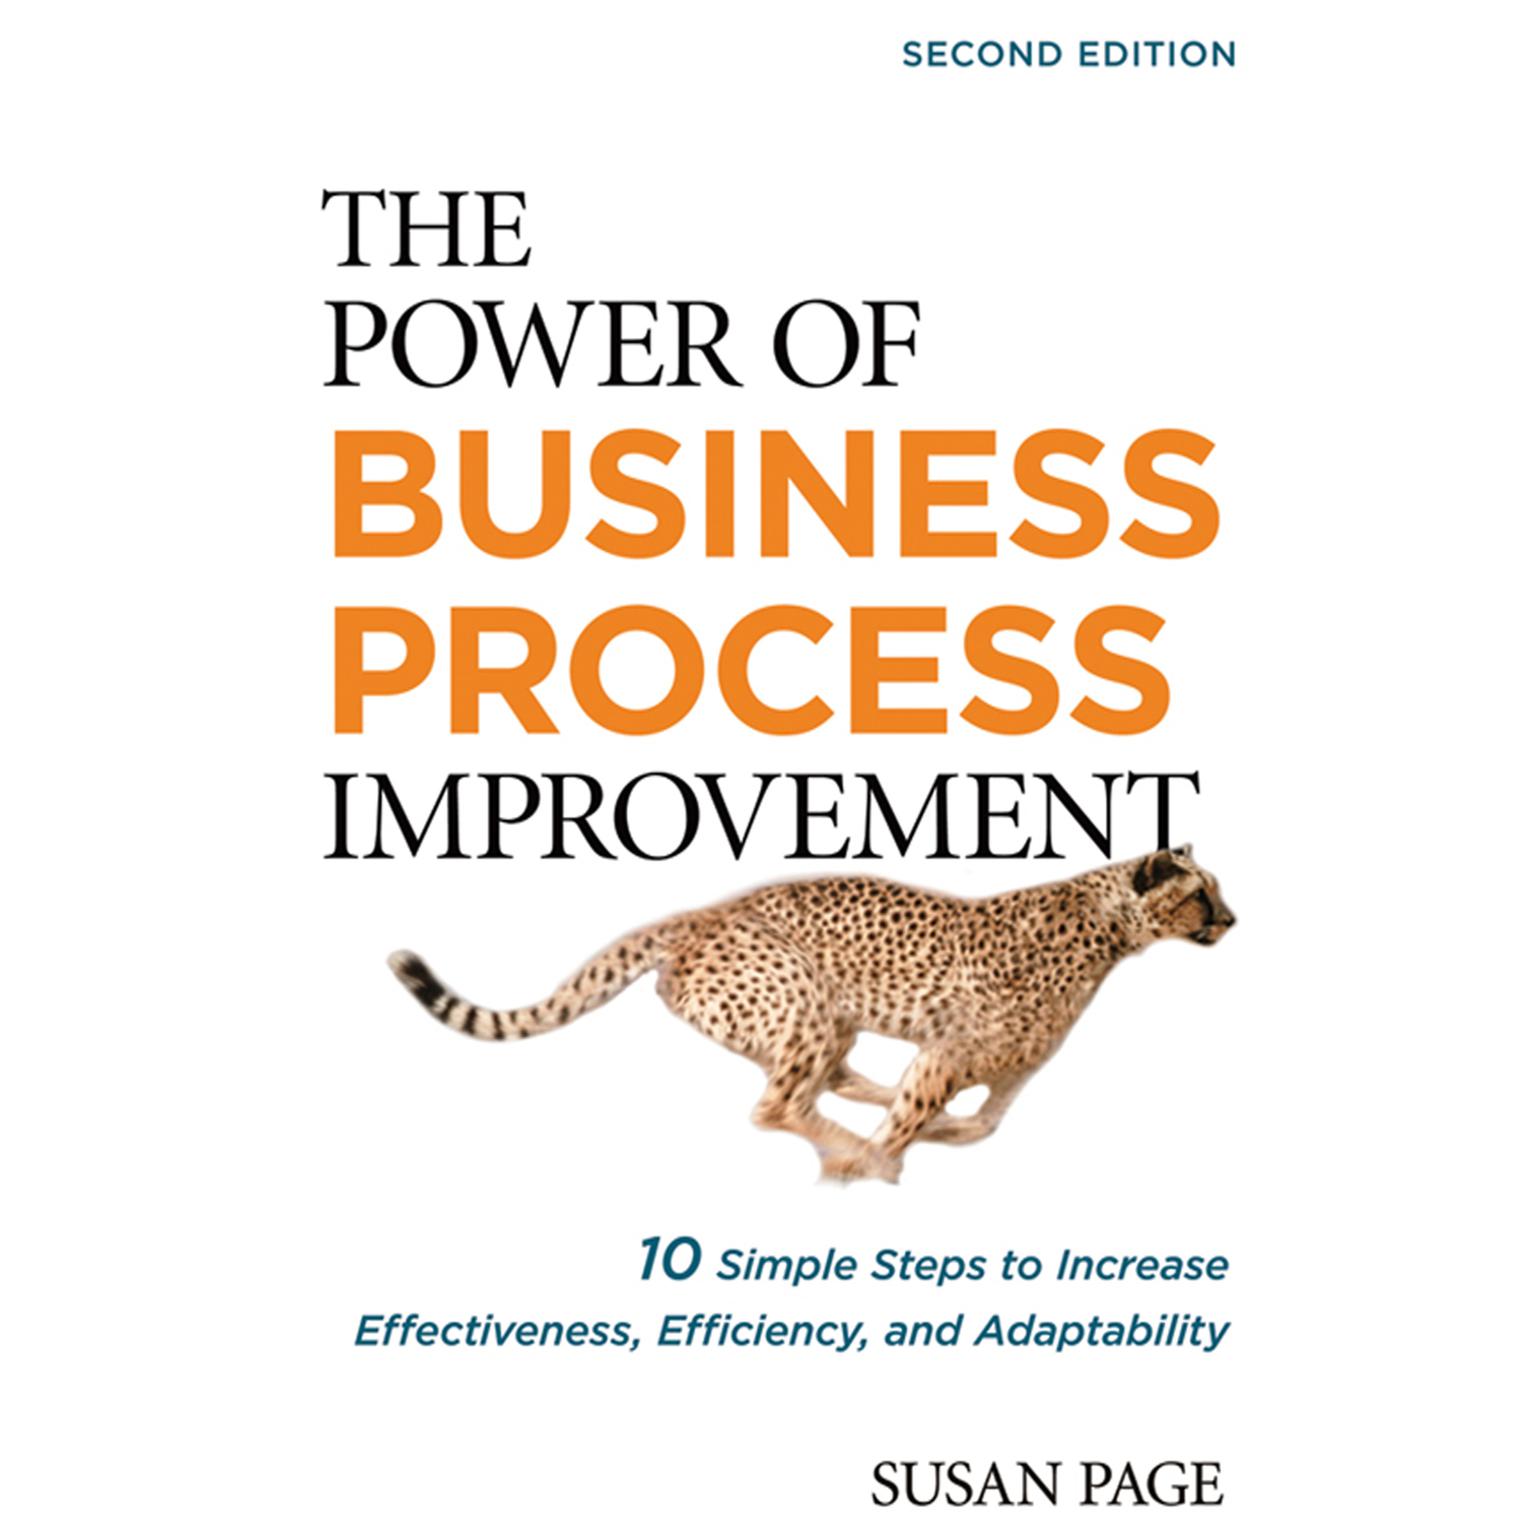 The Power of Business Process Improvement 2nd Edition: 10 Simple Steps to Increase Effectiveness, Efficiency, and Adaptability Audiobook, by Susan Page